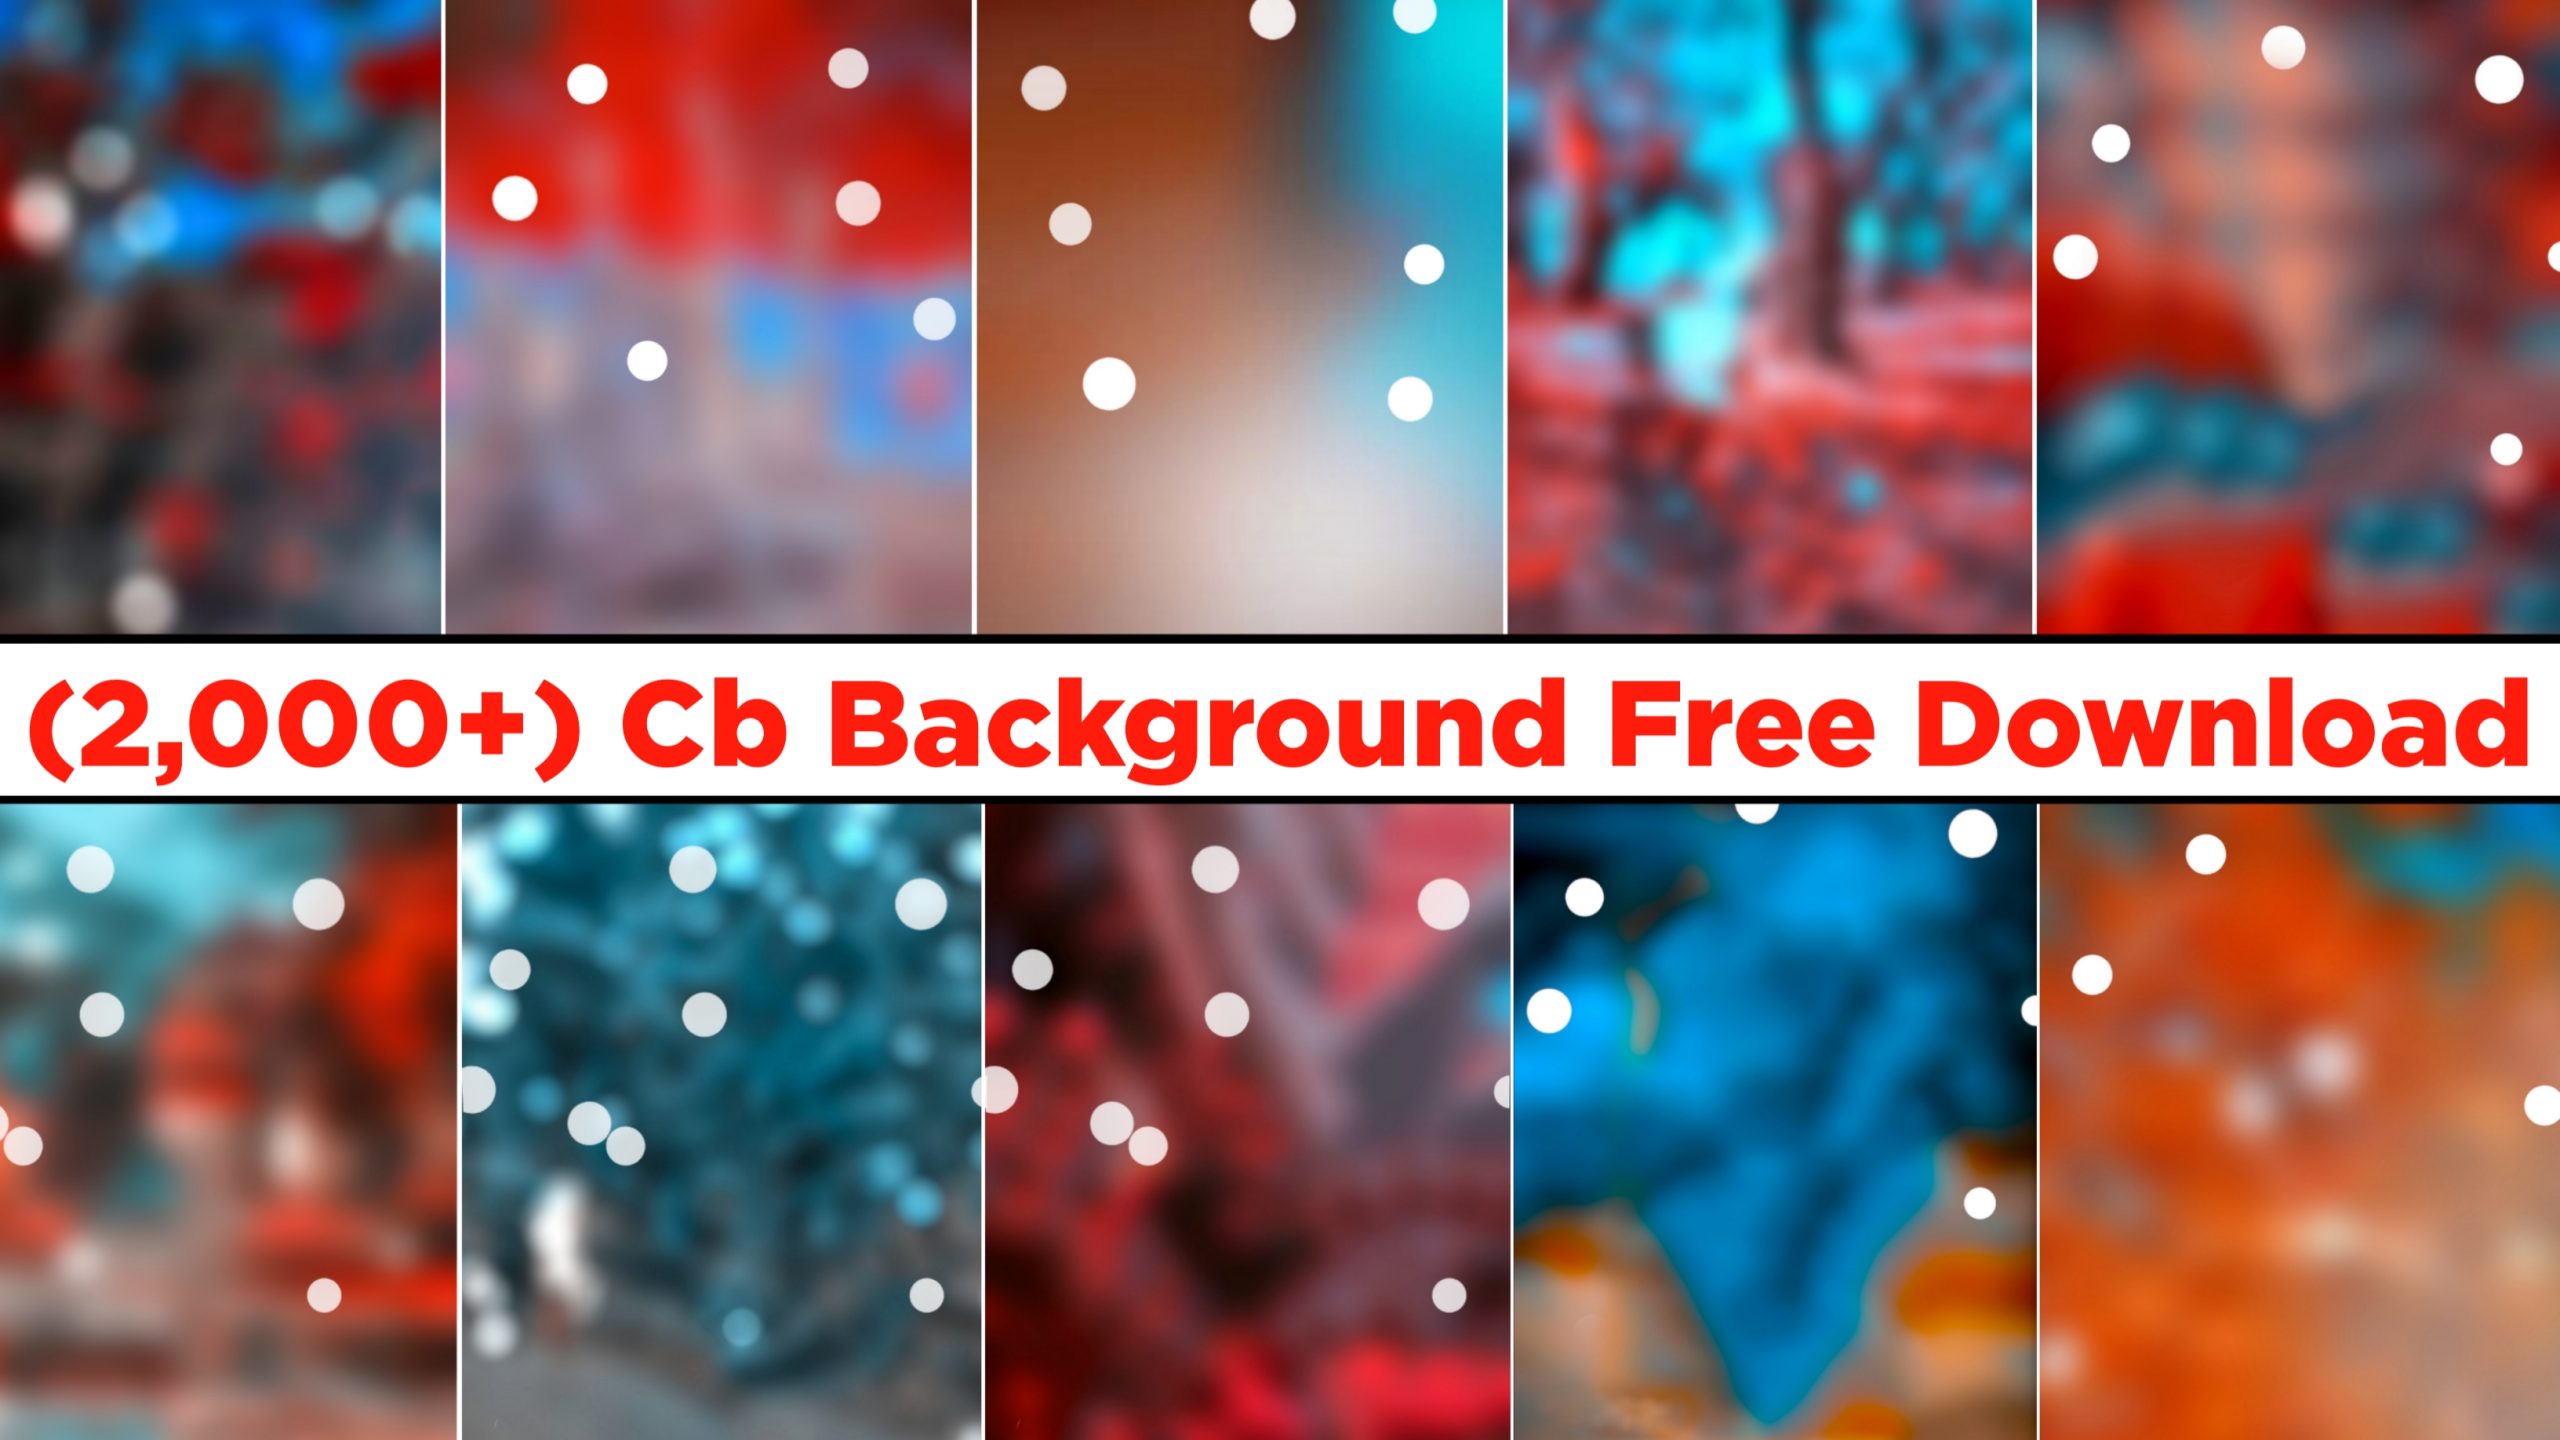 180 Wallpapers and CB background ideas  best background images blur photo  background studio background images